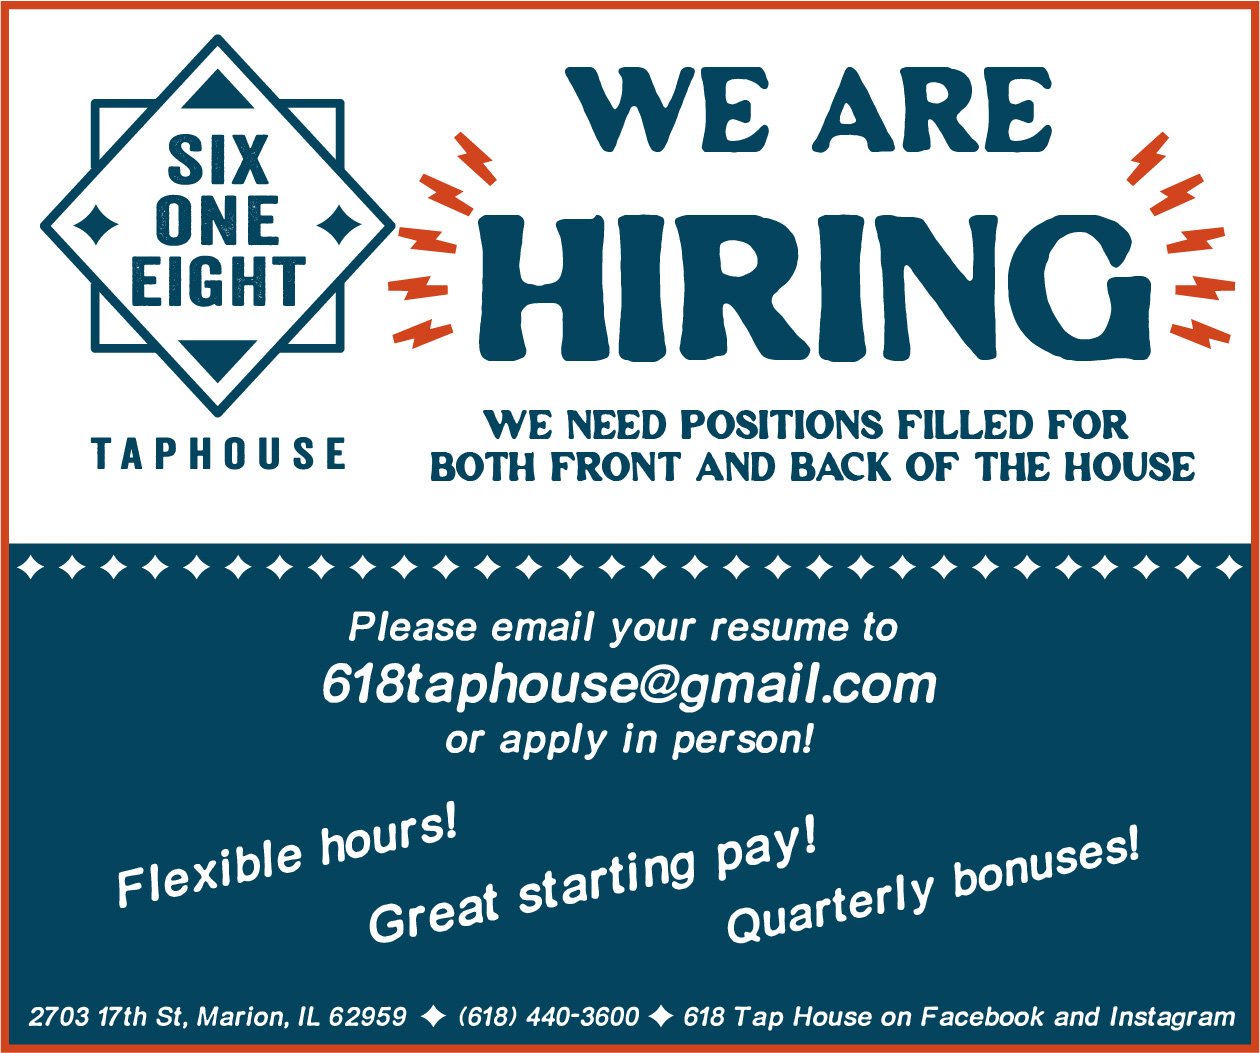 618 Taphouse is currently hiring. Please email 618taphouse@gmail.com or apply in person.